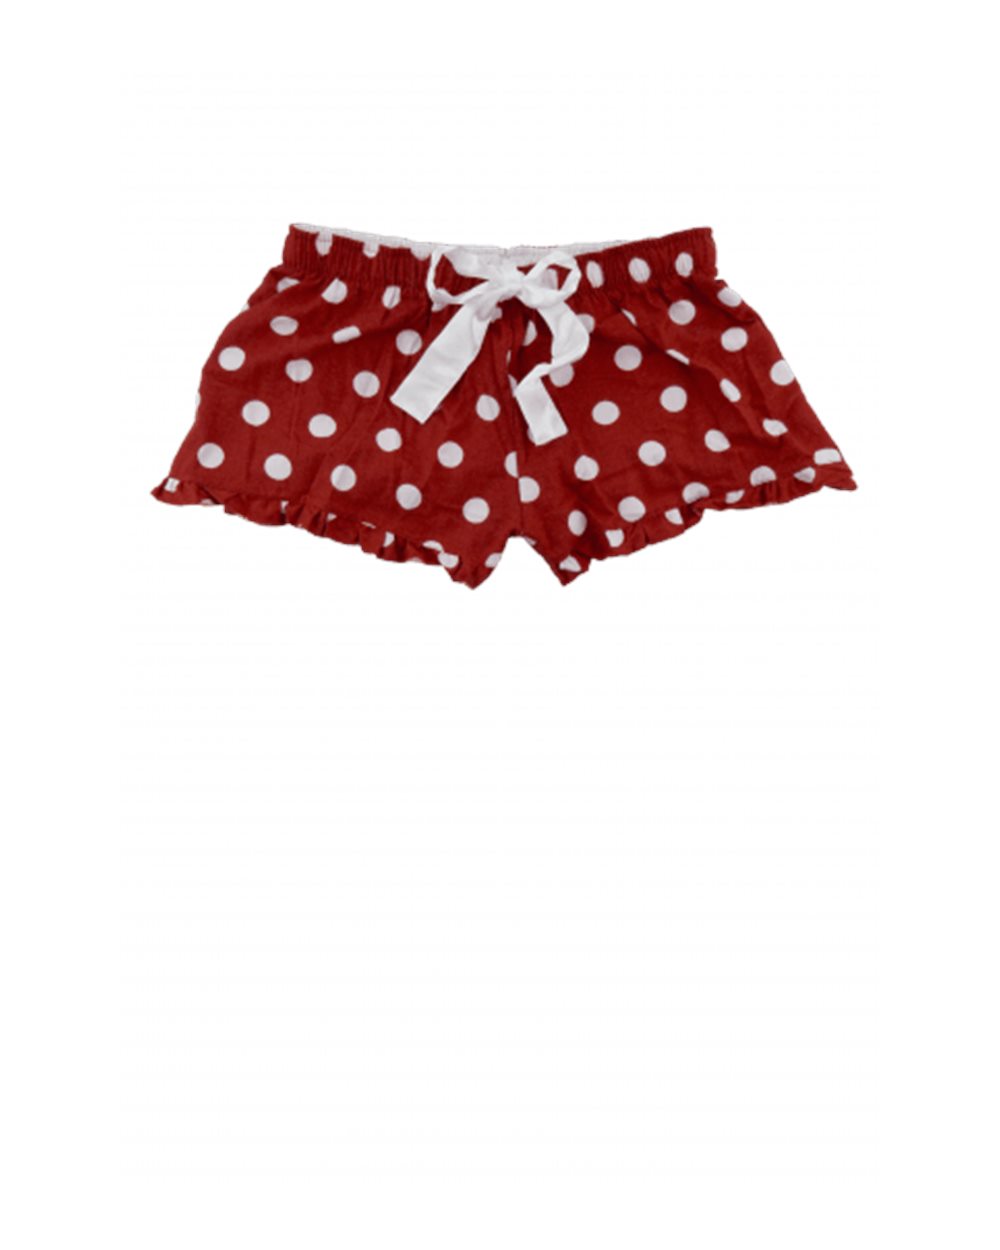 click to view Red/ White Polka Dot